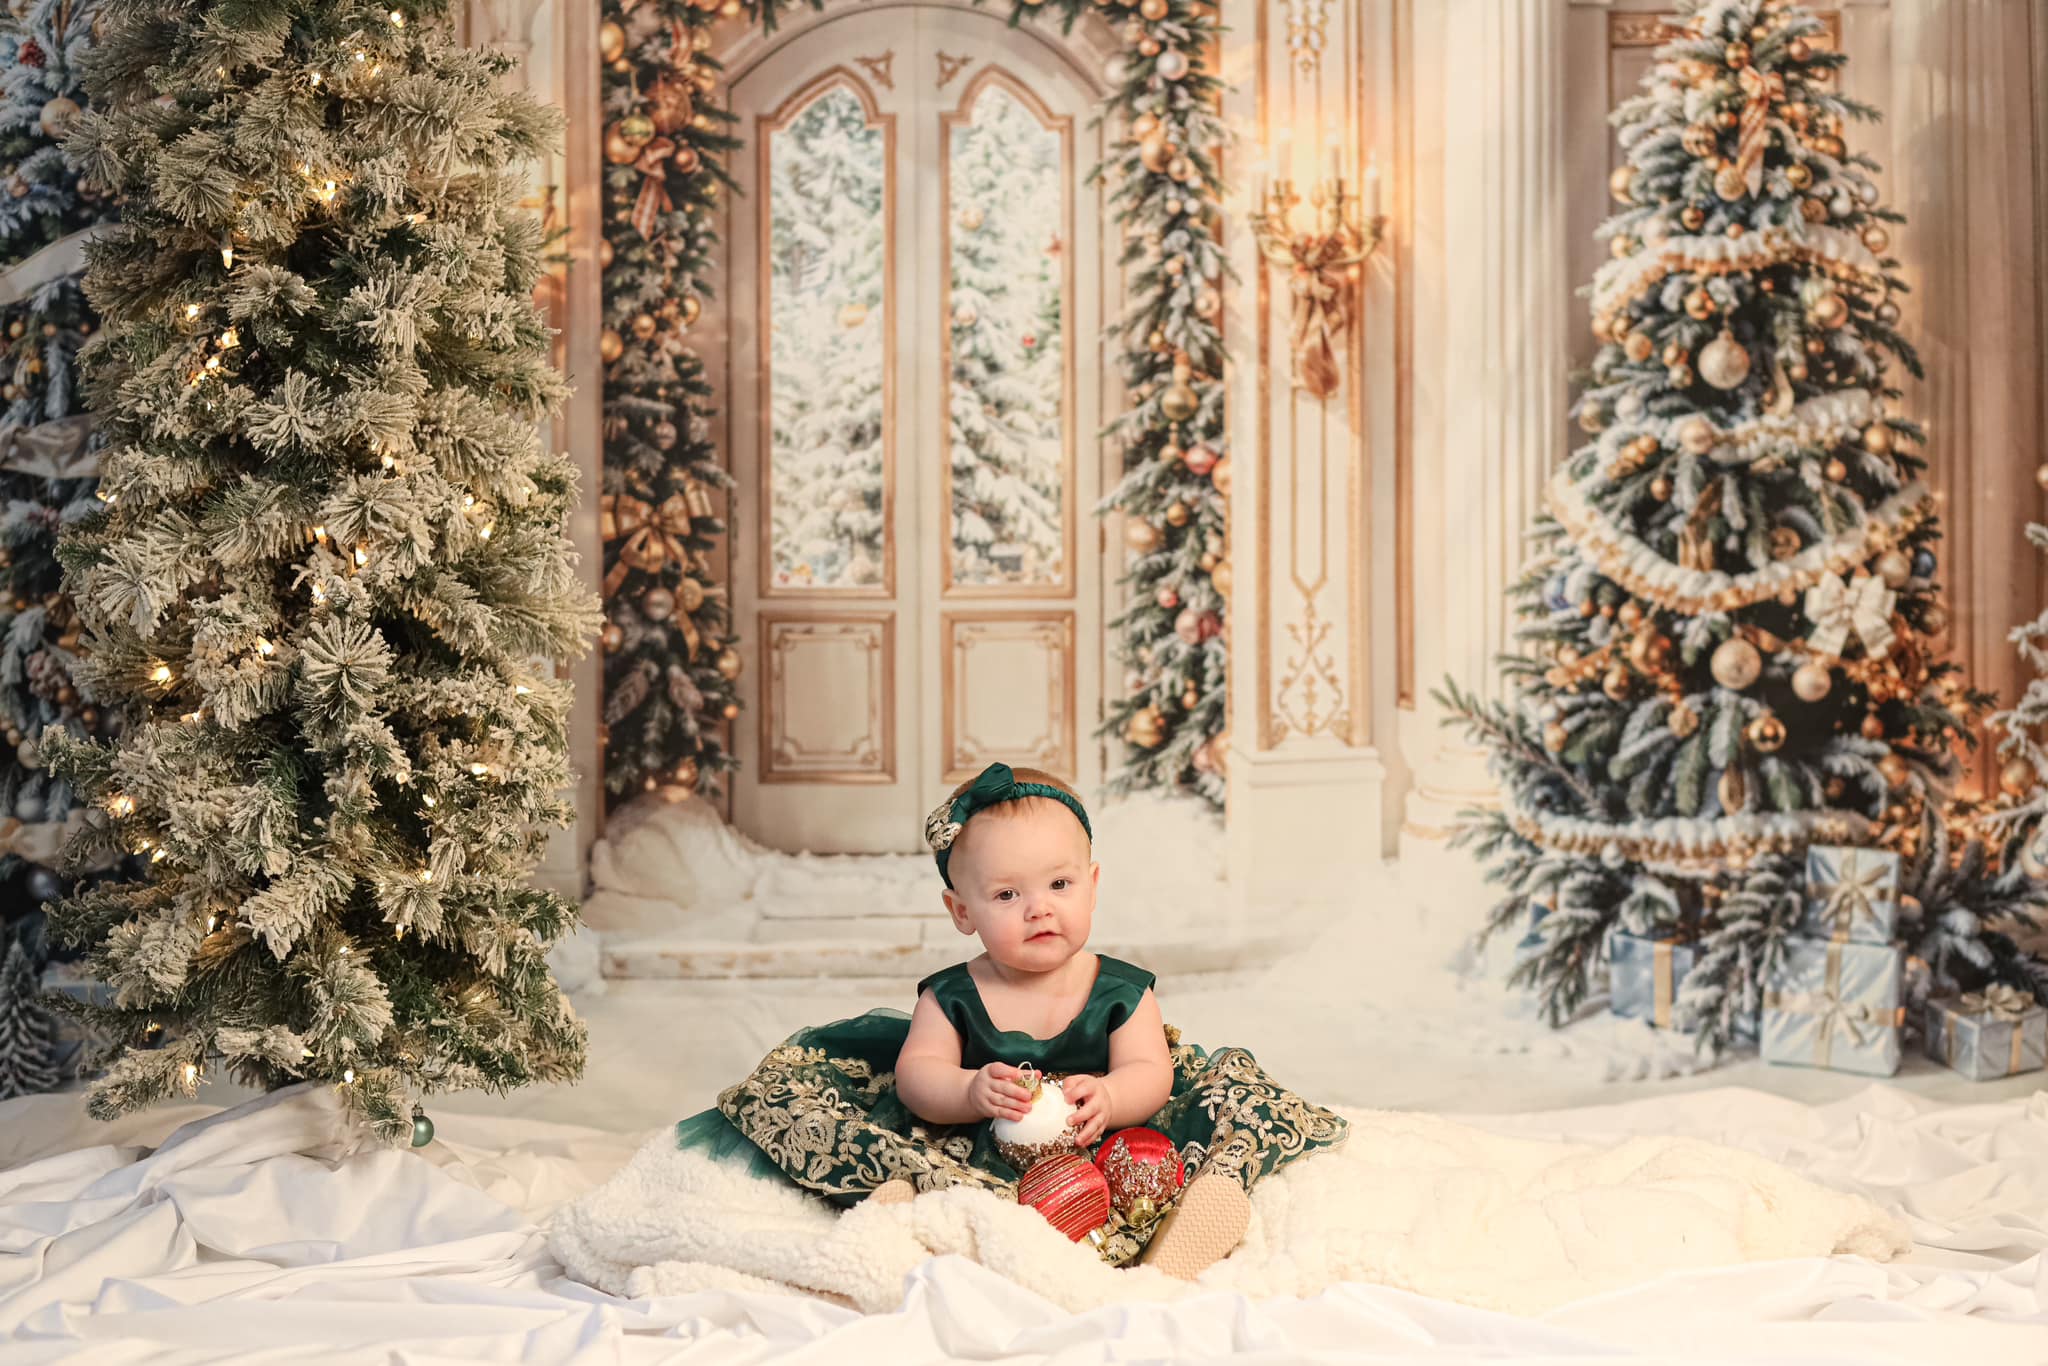 Kate Winter Christmas White Retro Grand Palace Backdrop Designed by Chain Photography